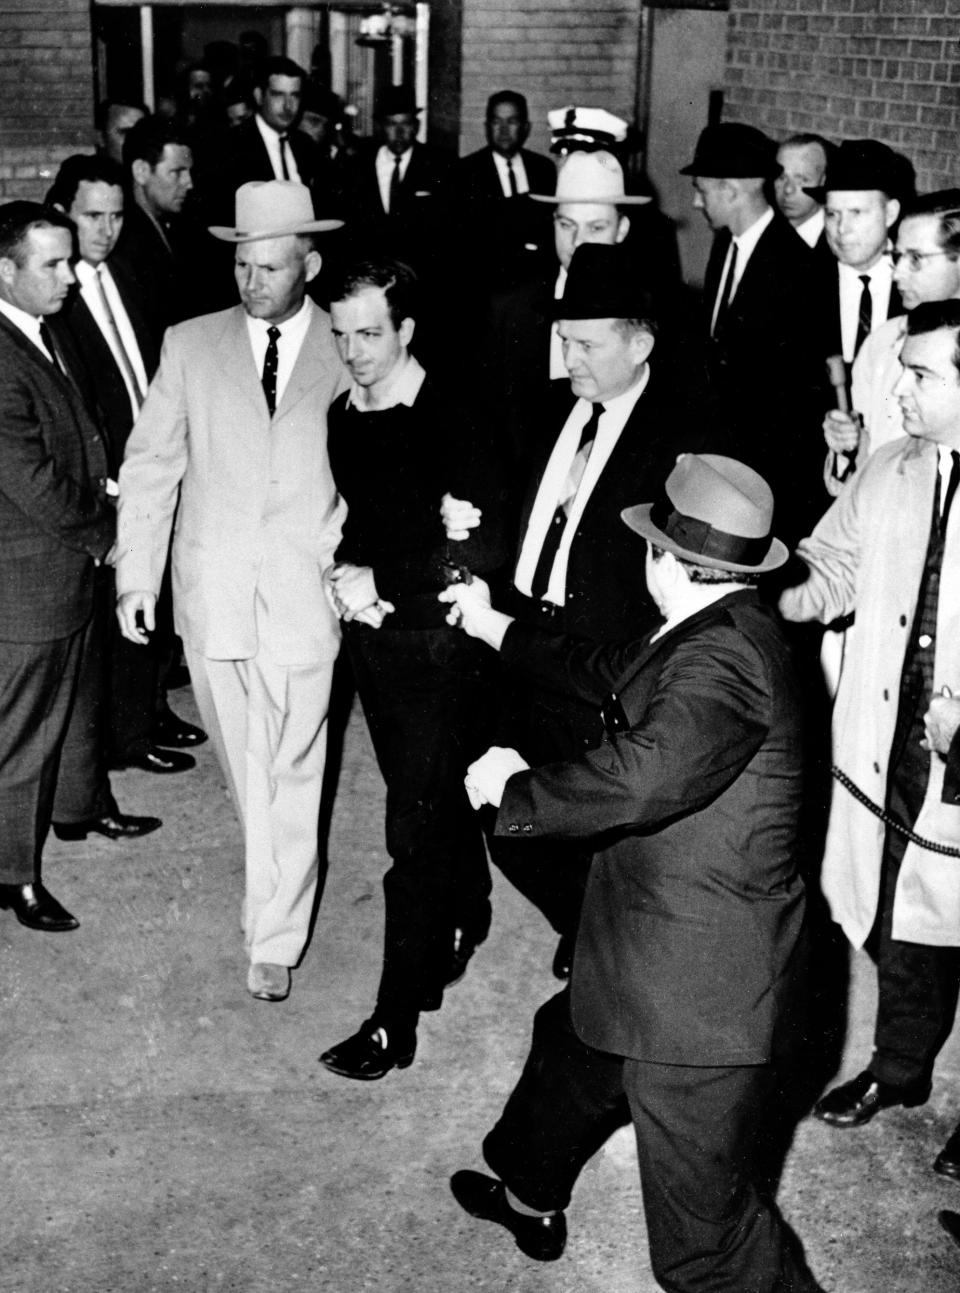 In a Nov. 24, 1963, file photo, President John F. Kennedy assassin Lee Harvey Oswald, center in handcuffs, is shot by Jack Ruby, foreground, in the underground garage of the Dallas police headquarters. (AP Photo/Jack Beers, File) (AP Photo/The Dallas Morning News)